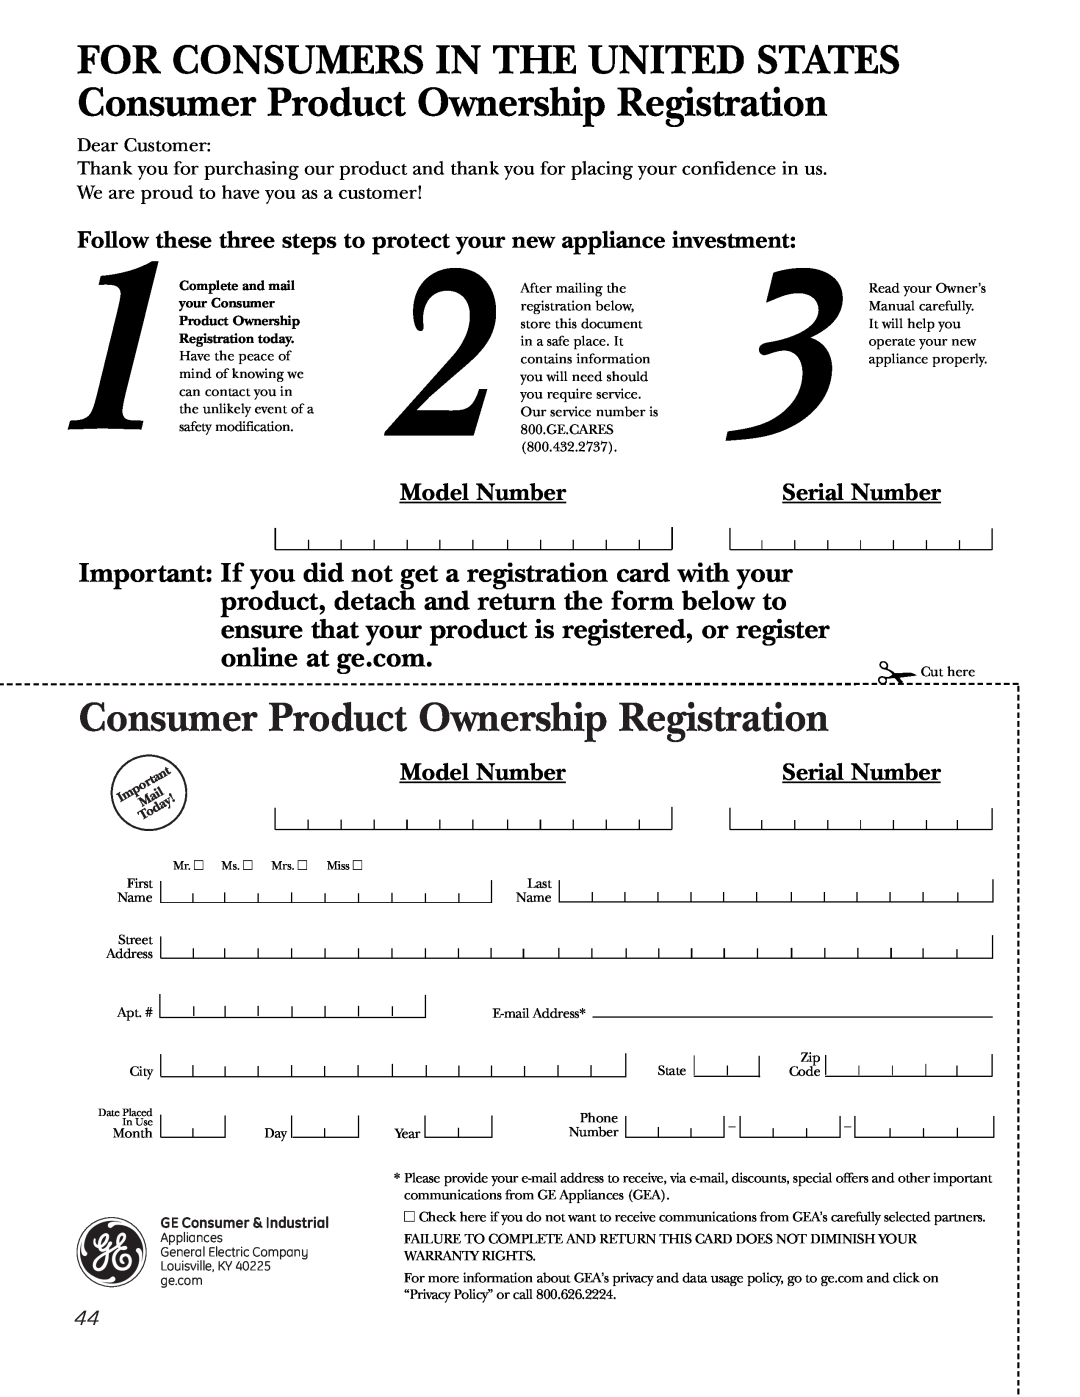 GE PGS968 Consumer Product Ownership Registration, online at ge.com, Model Number, Serial Number, GE Consumer & Industrial 